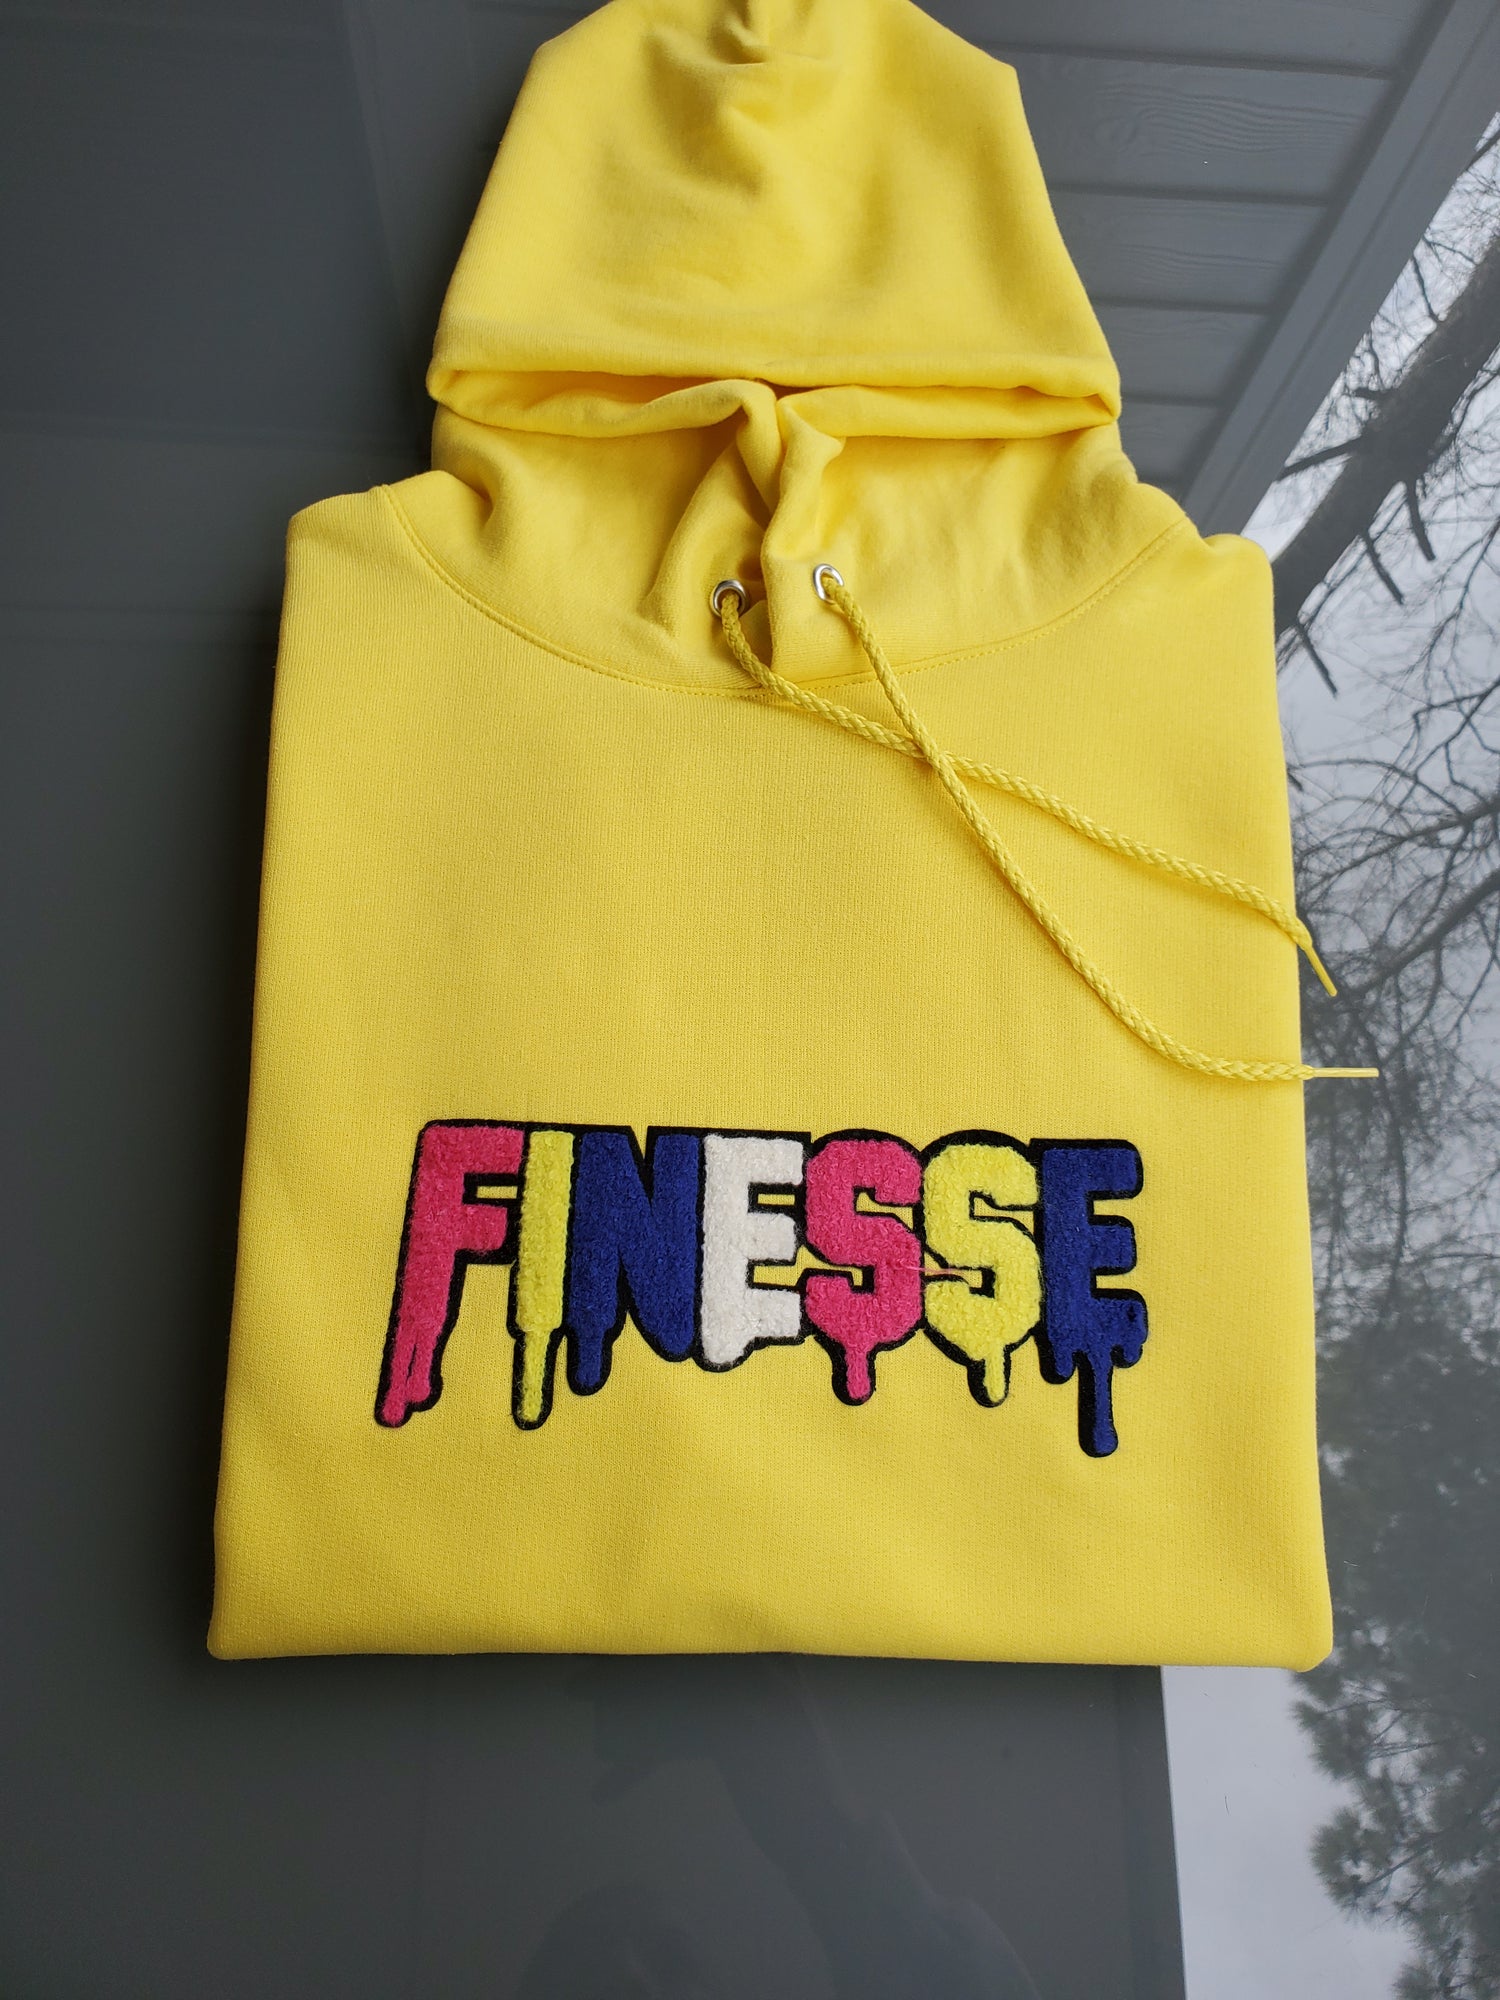 Finesse Unisex Hoodie - Centre Ave Clothing Co.